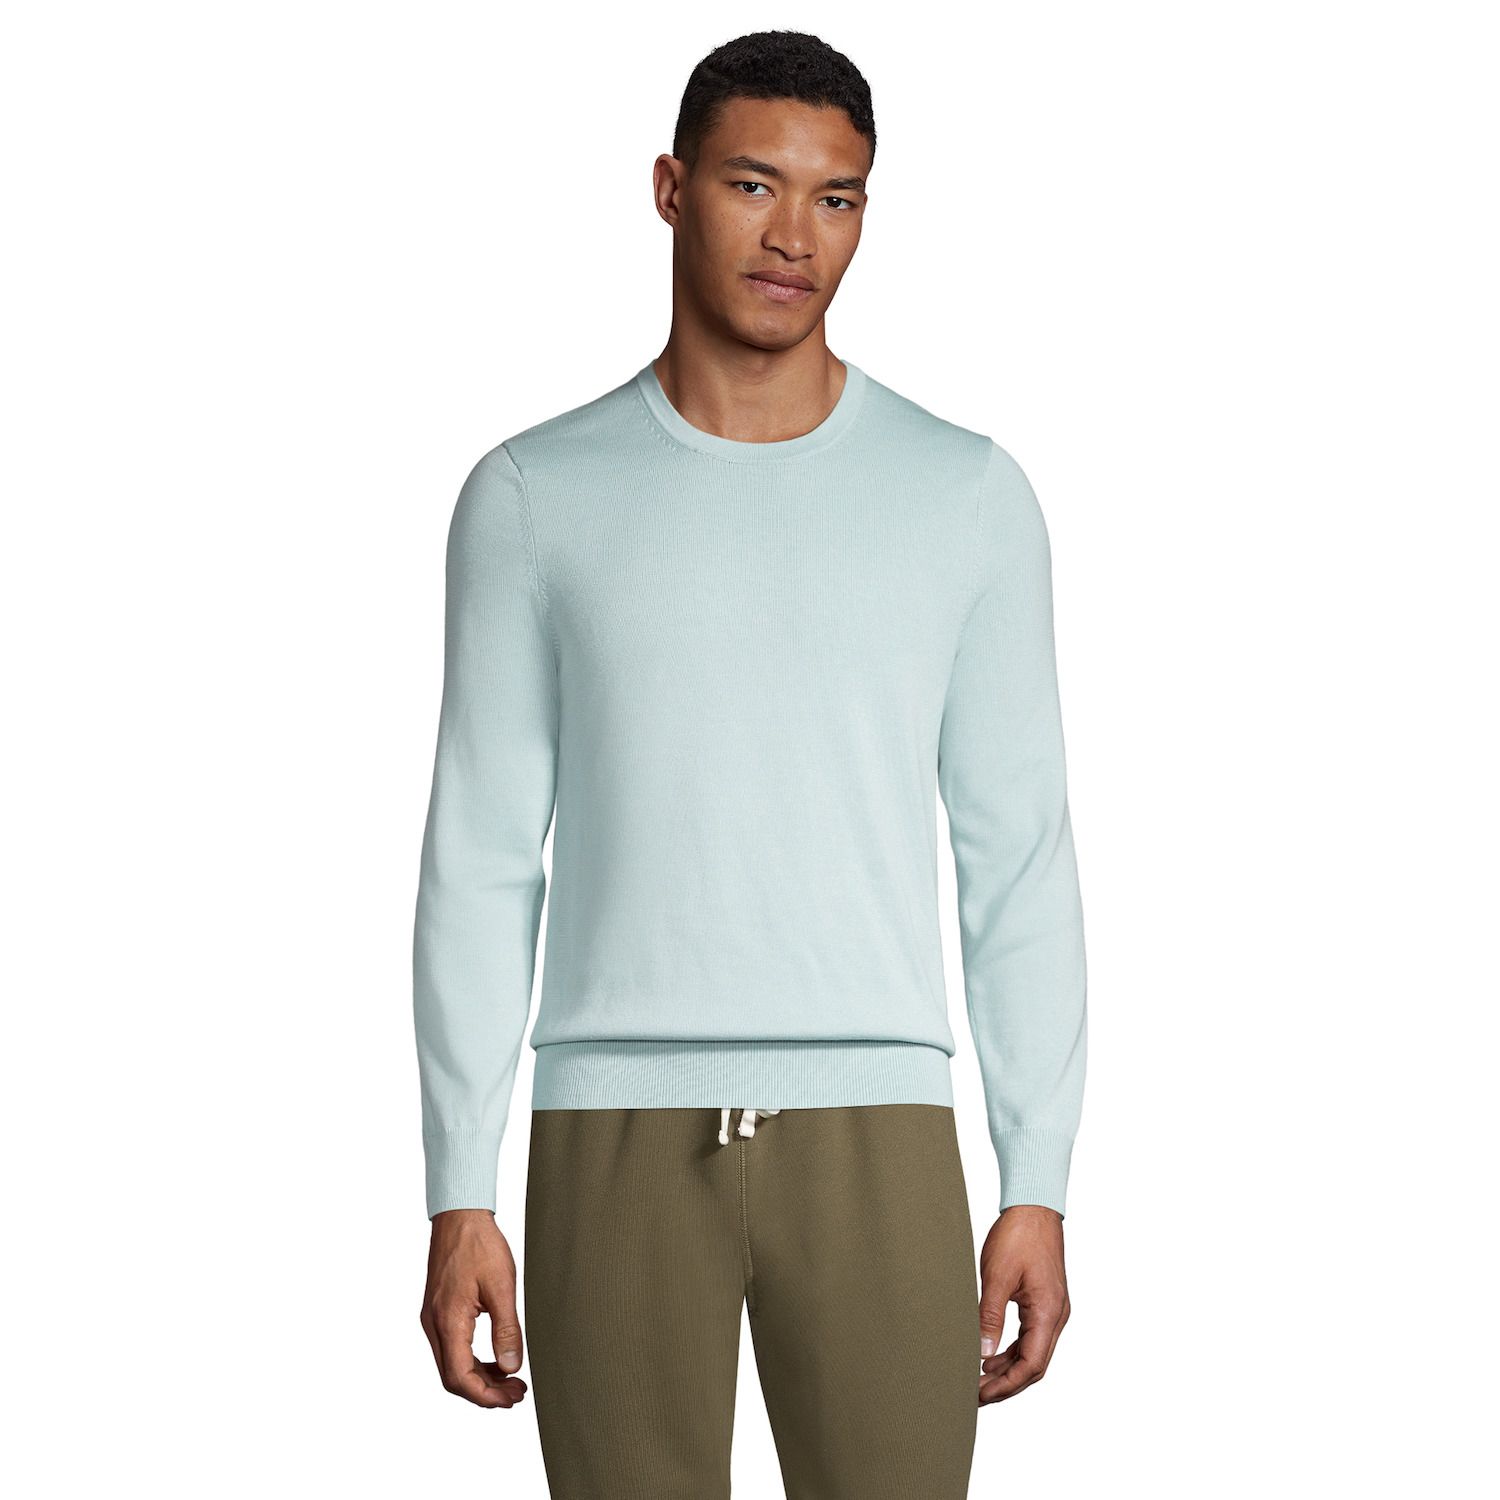 Image for Lands' End Men's Supima Cotton Sweater at Kohl's.